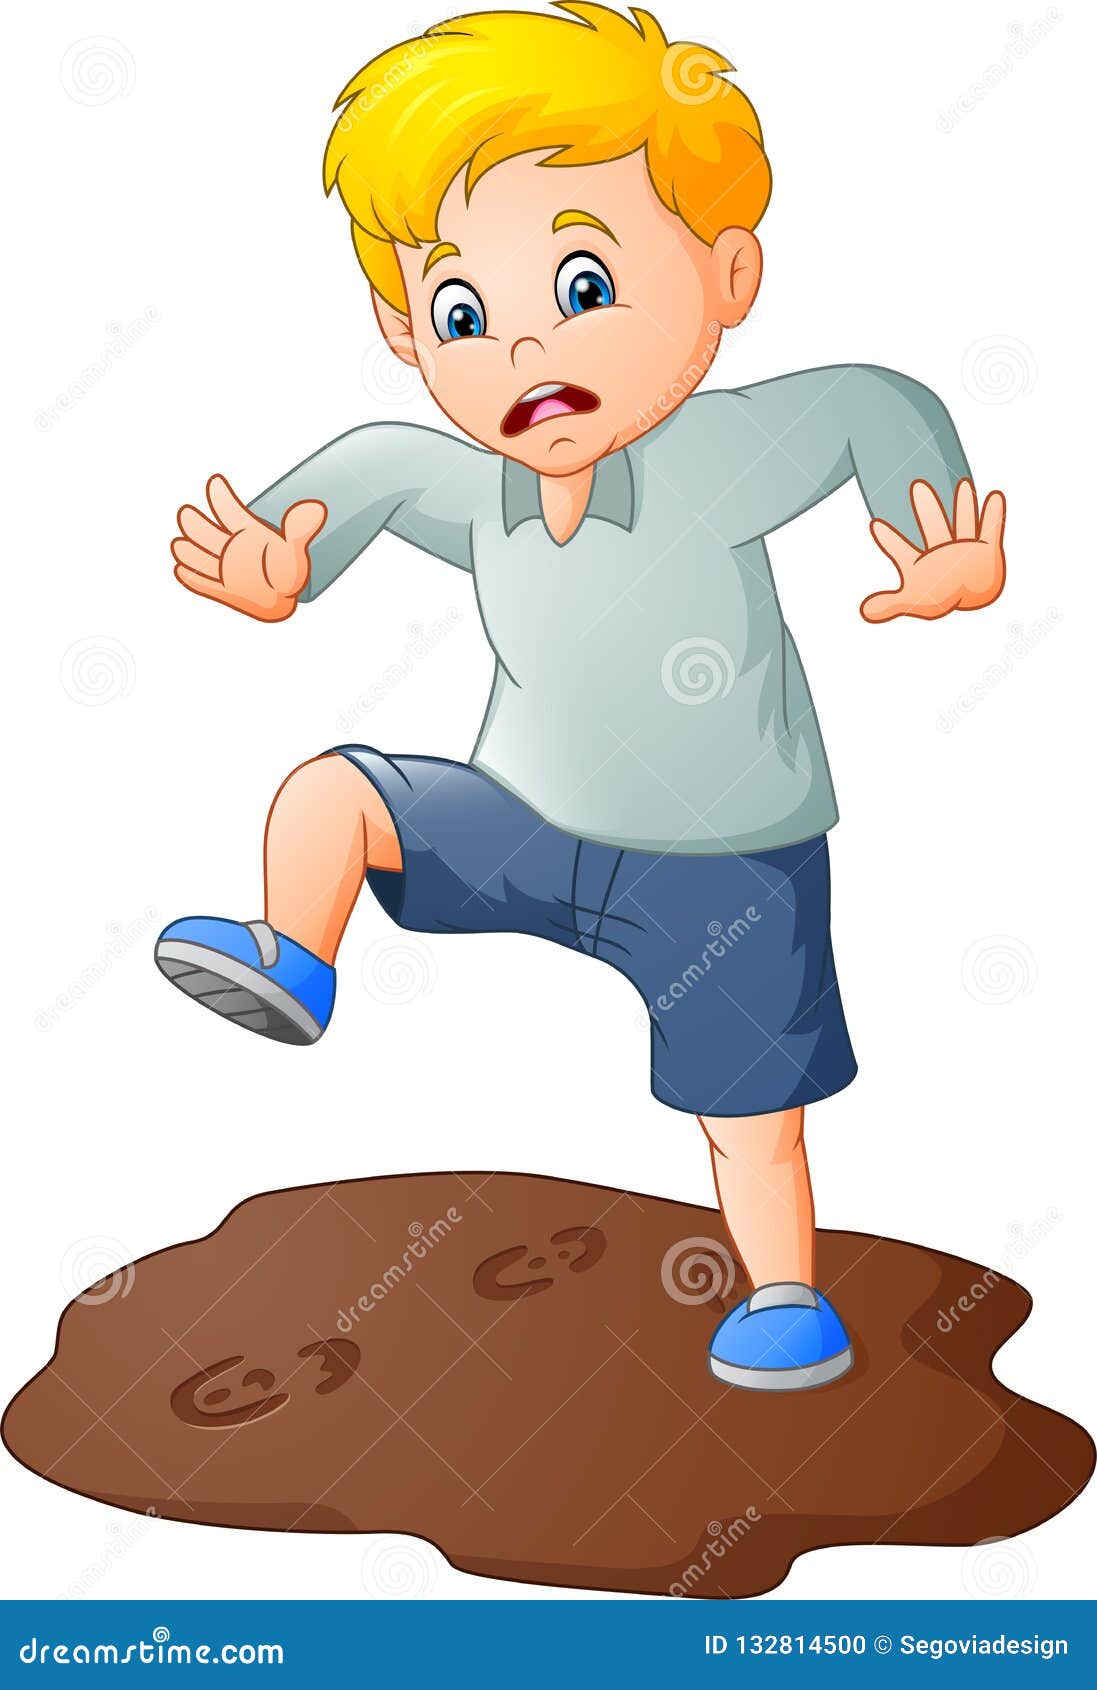 Cartoon Sad Boy with a Mud Puddle Stock Vector - Illustration of funny,  happy: 132814500